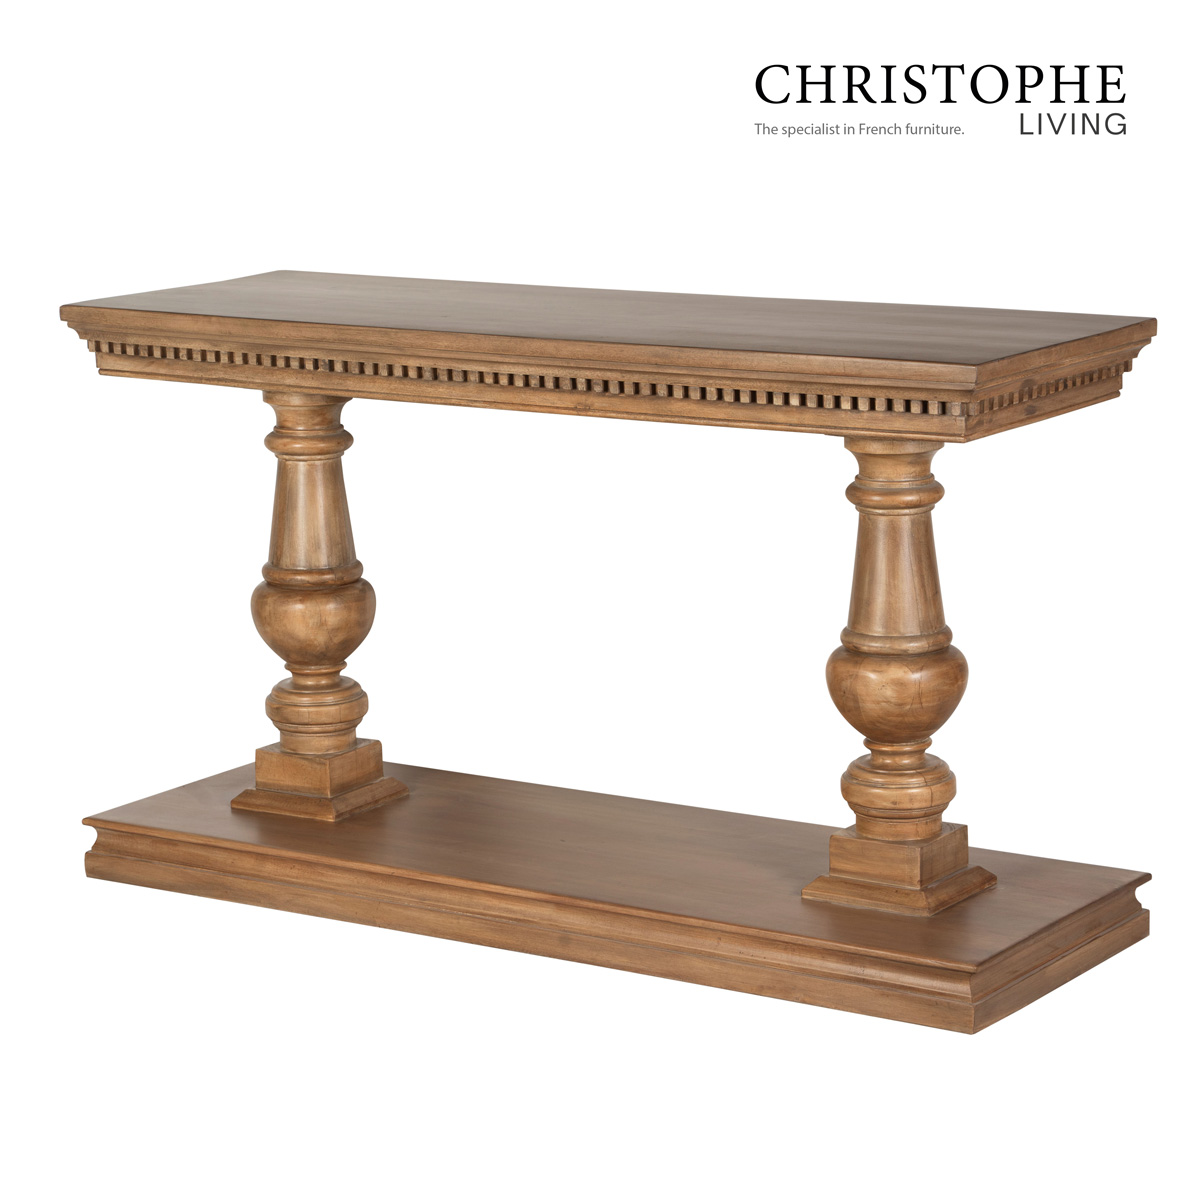 Valentino French Provincial Console Table - Solid Timber with Walnut Stain for Living Room and Hallway